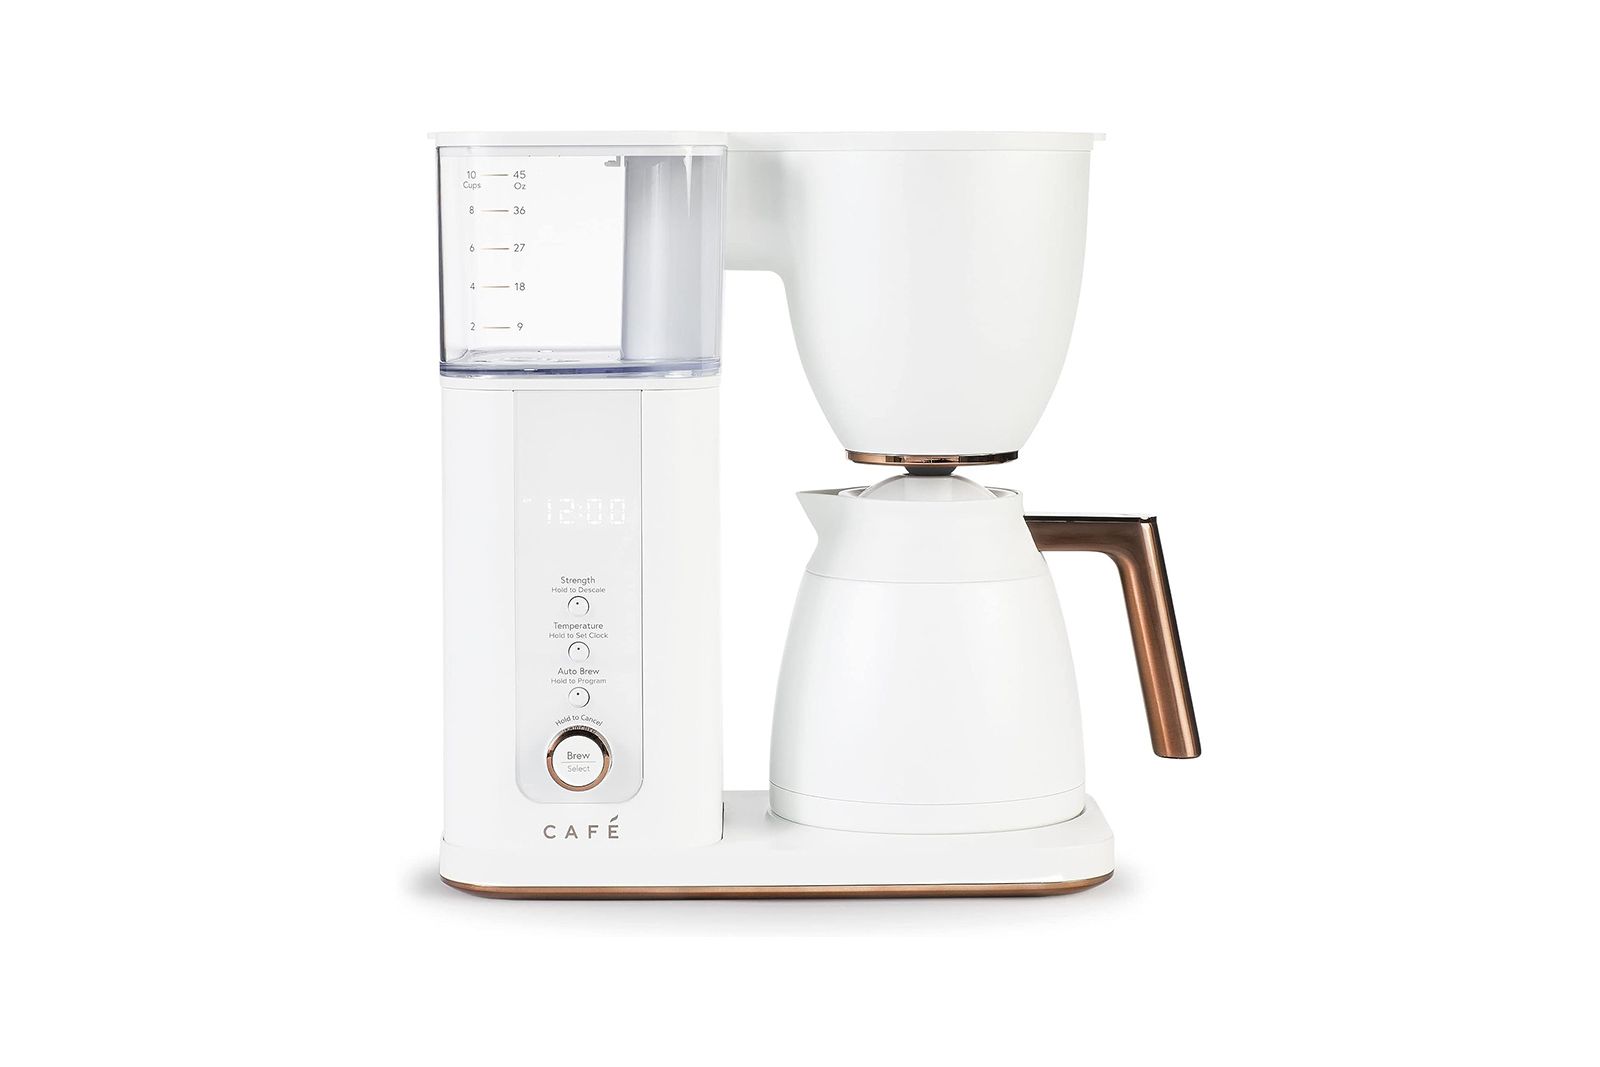 Atomi Smart - The atomi Smart Coffee Maker was selected as one of the best coffee  makers that work with Alexa! Learn more:  Buy now:   . . #atomismart #atomi # coffee #